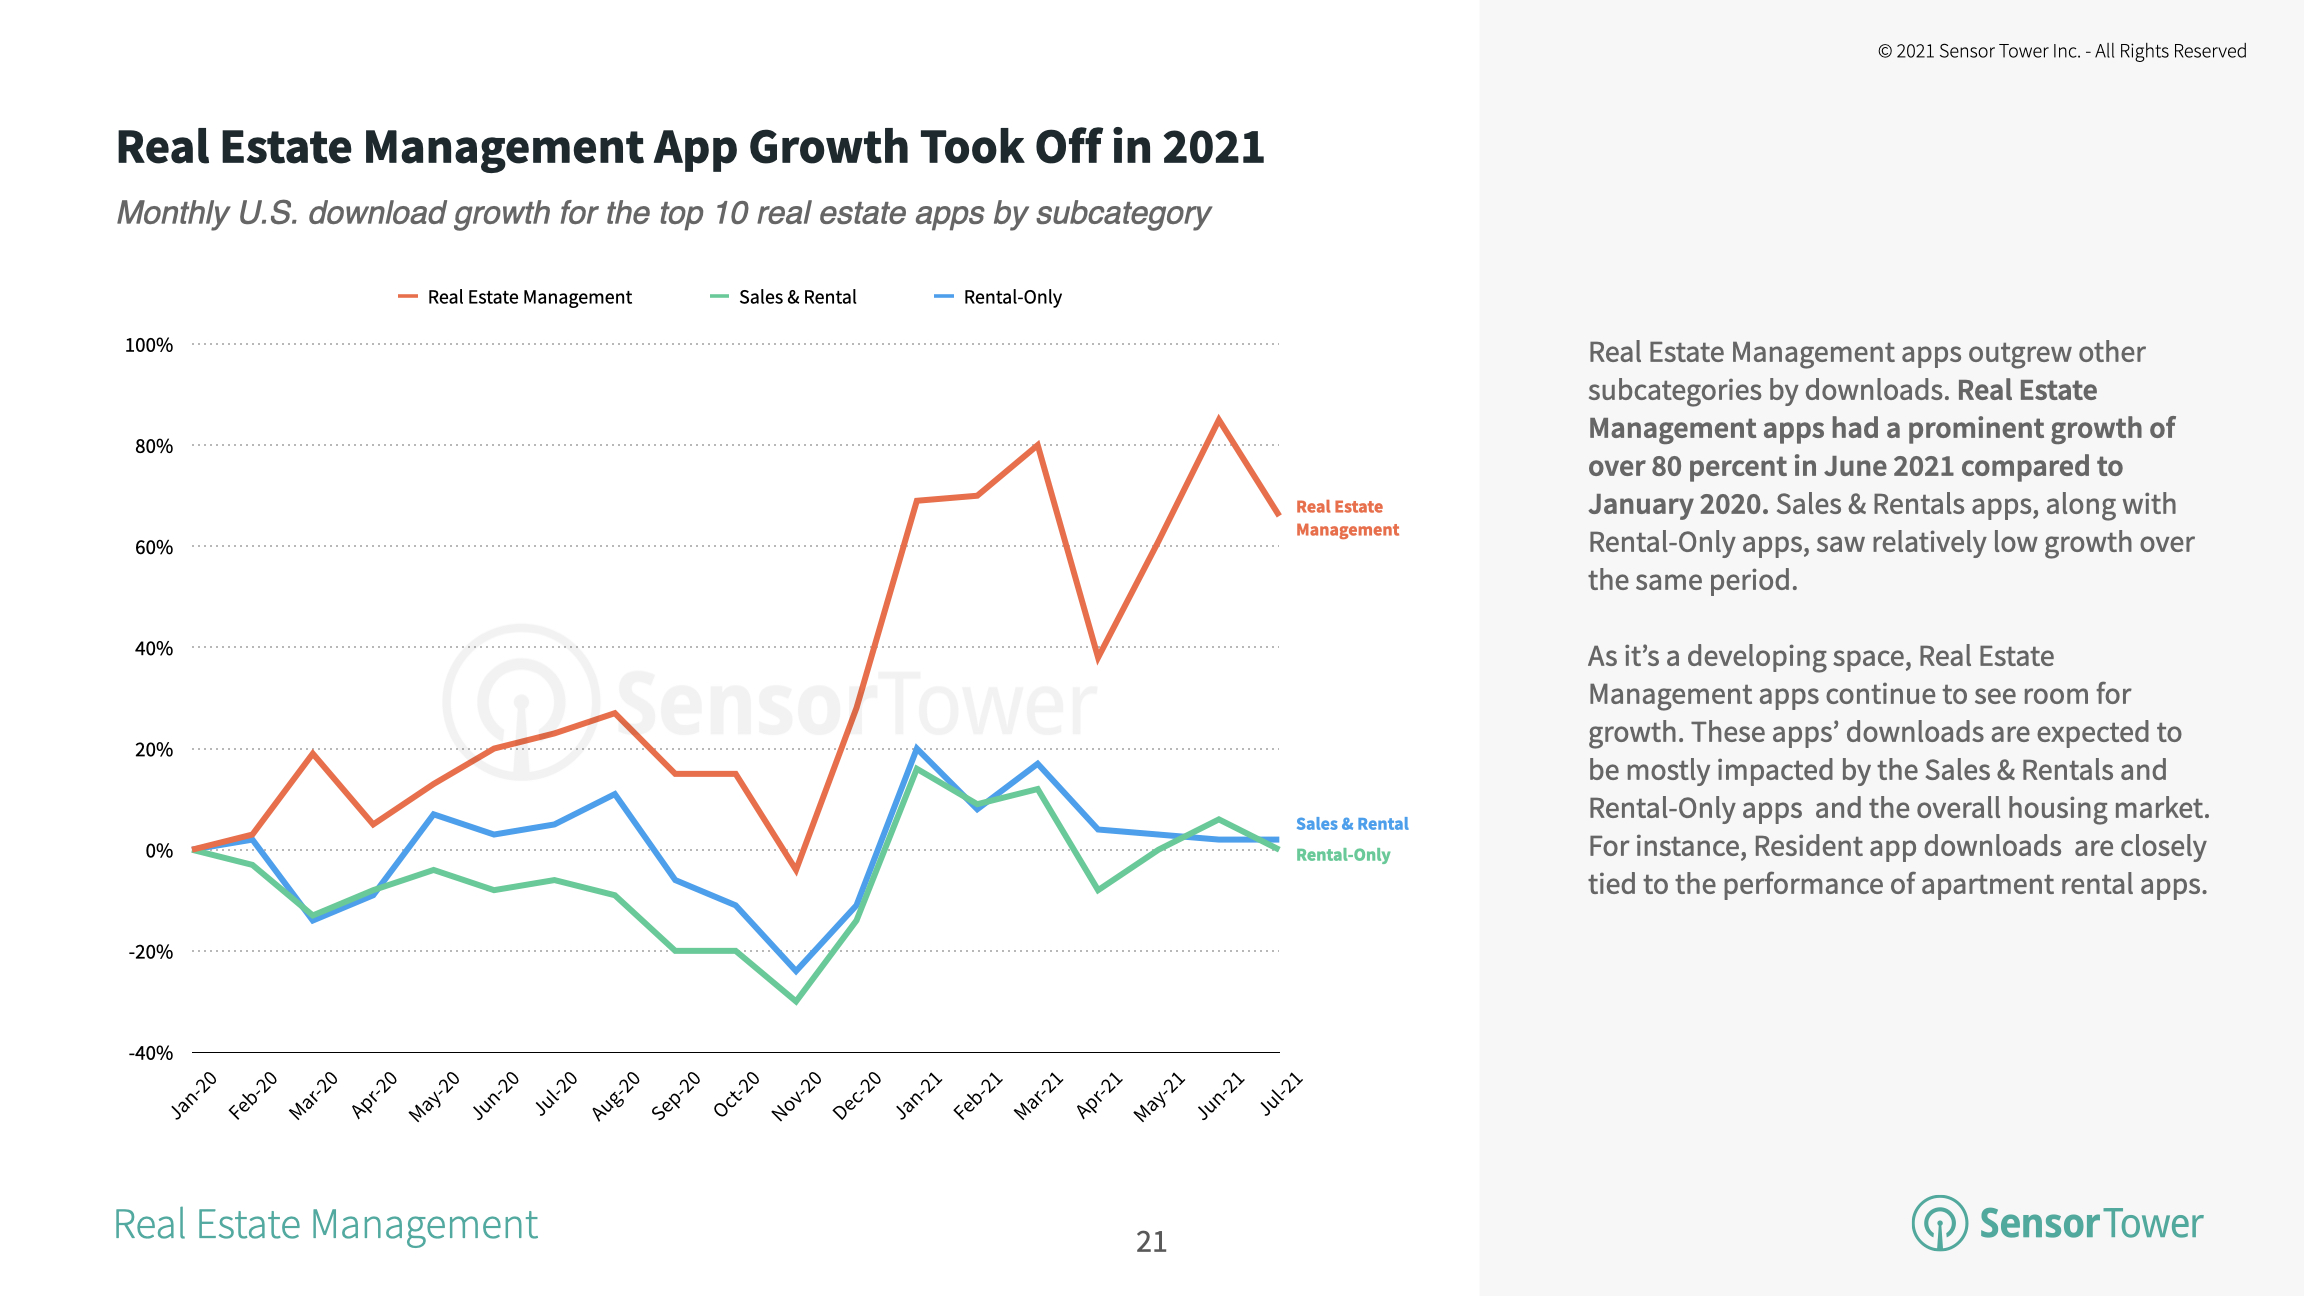 Real estate management app installs grew 80 percent in June 2021 when compared to January 2020